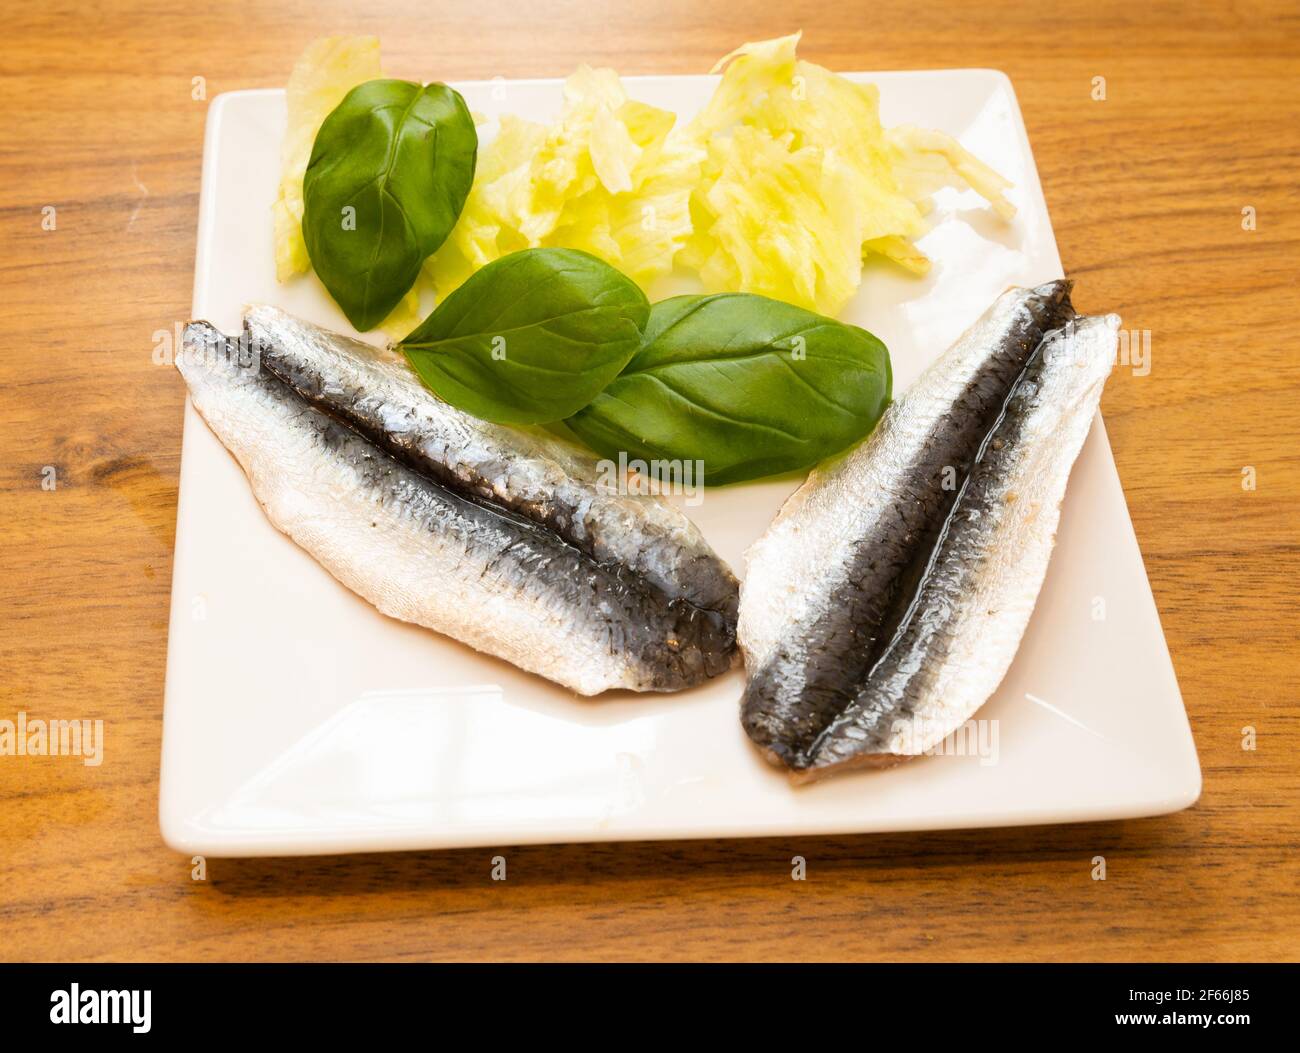 Raw North East Atlantic Butterfly Sardines on a plate before being cooked Stock Photo